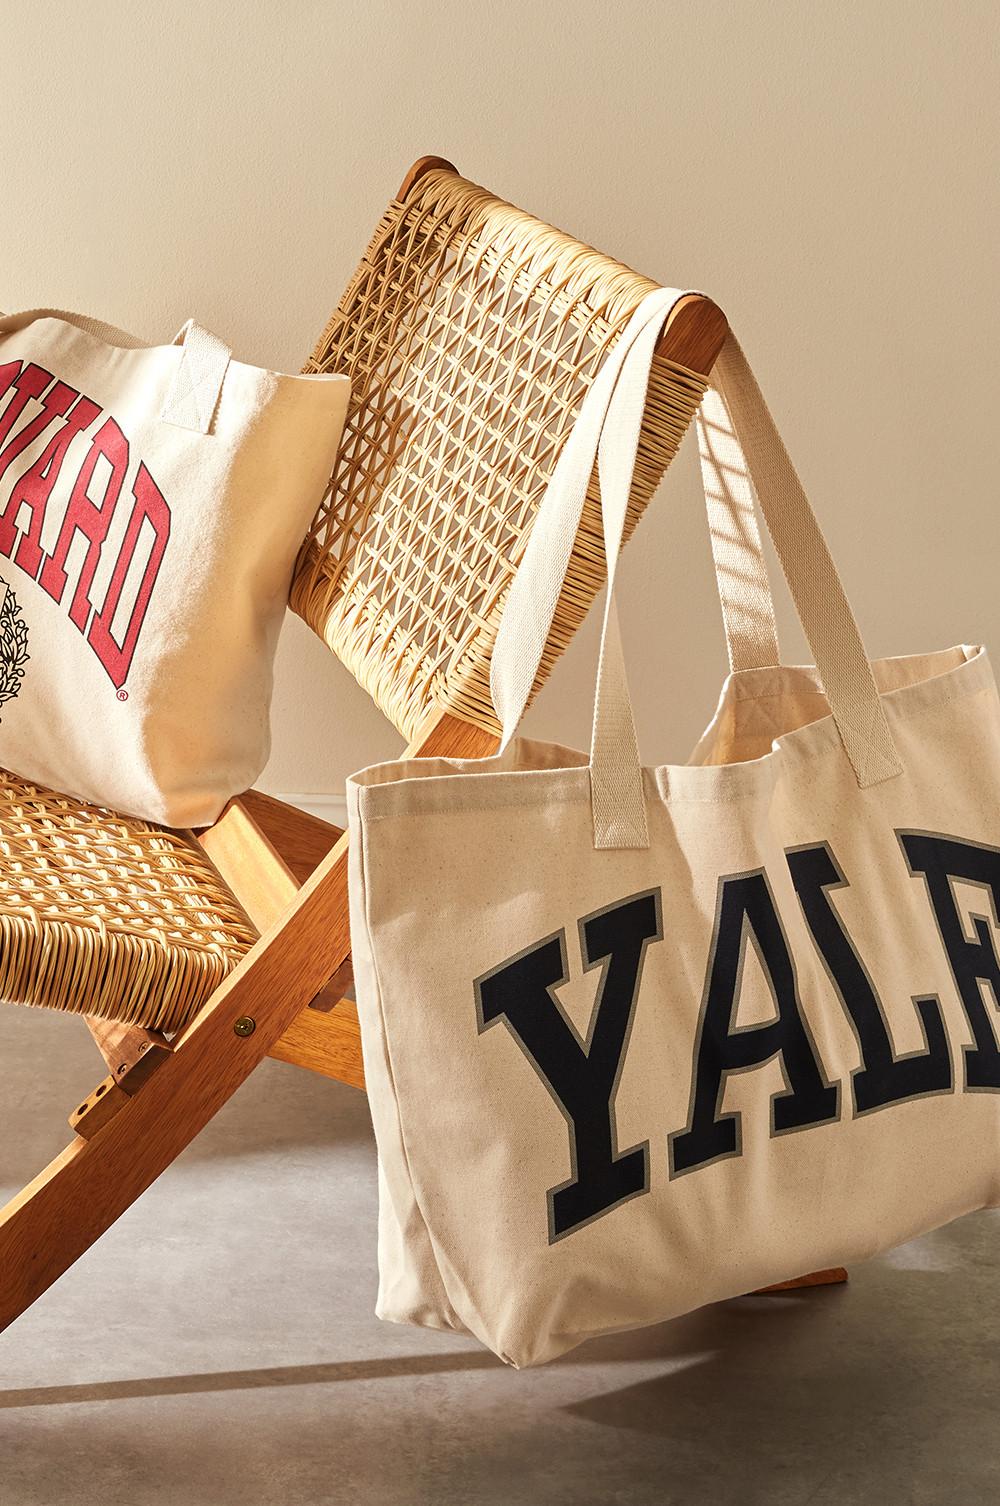 Canvas tote bags with Yale and Harvard logos in blue and red